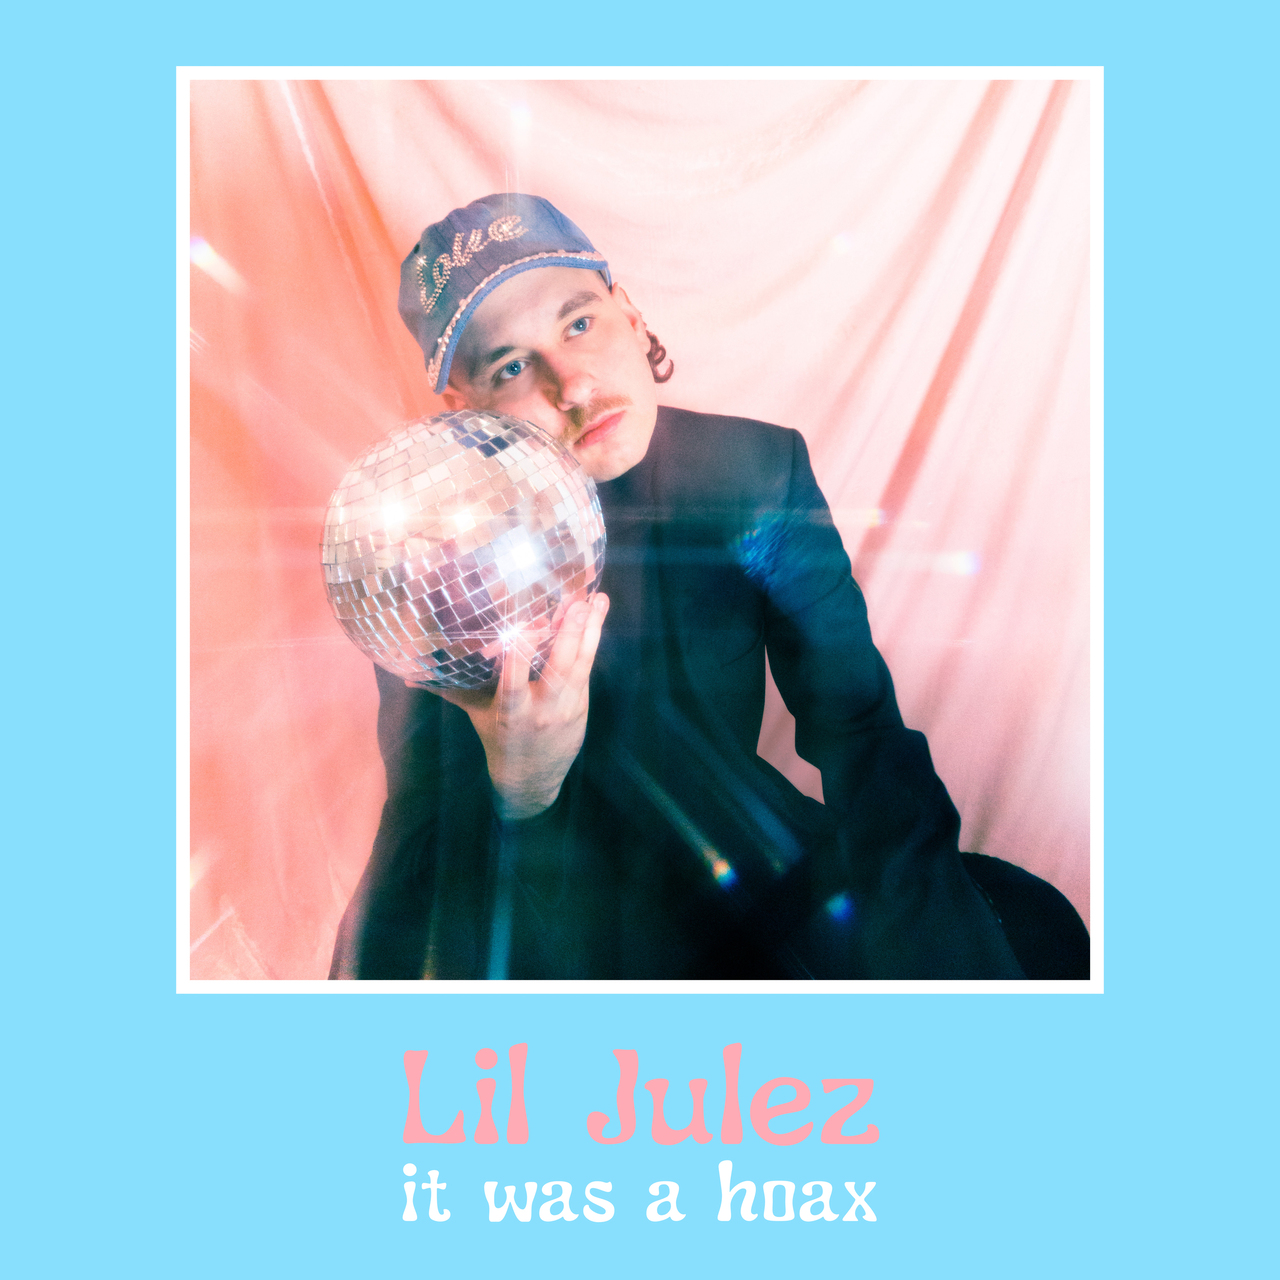 Albumcover "It was a hoax"